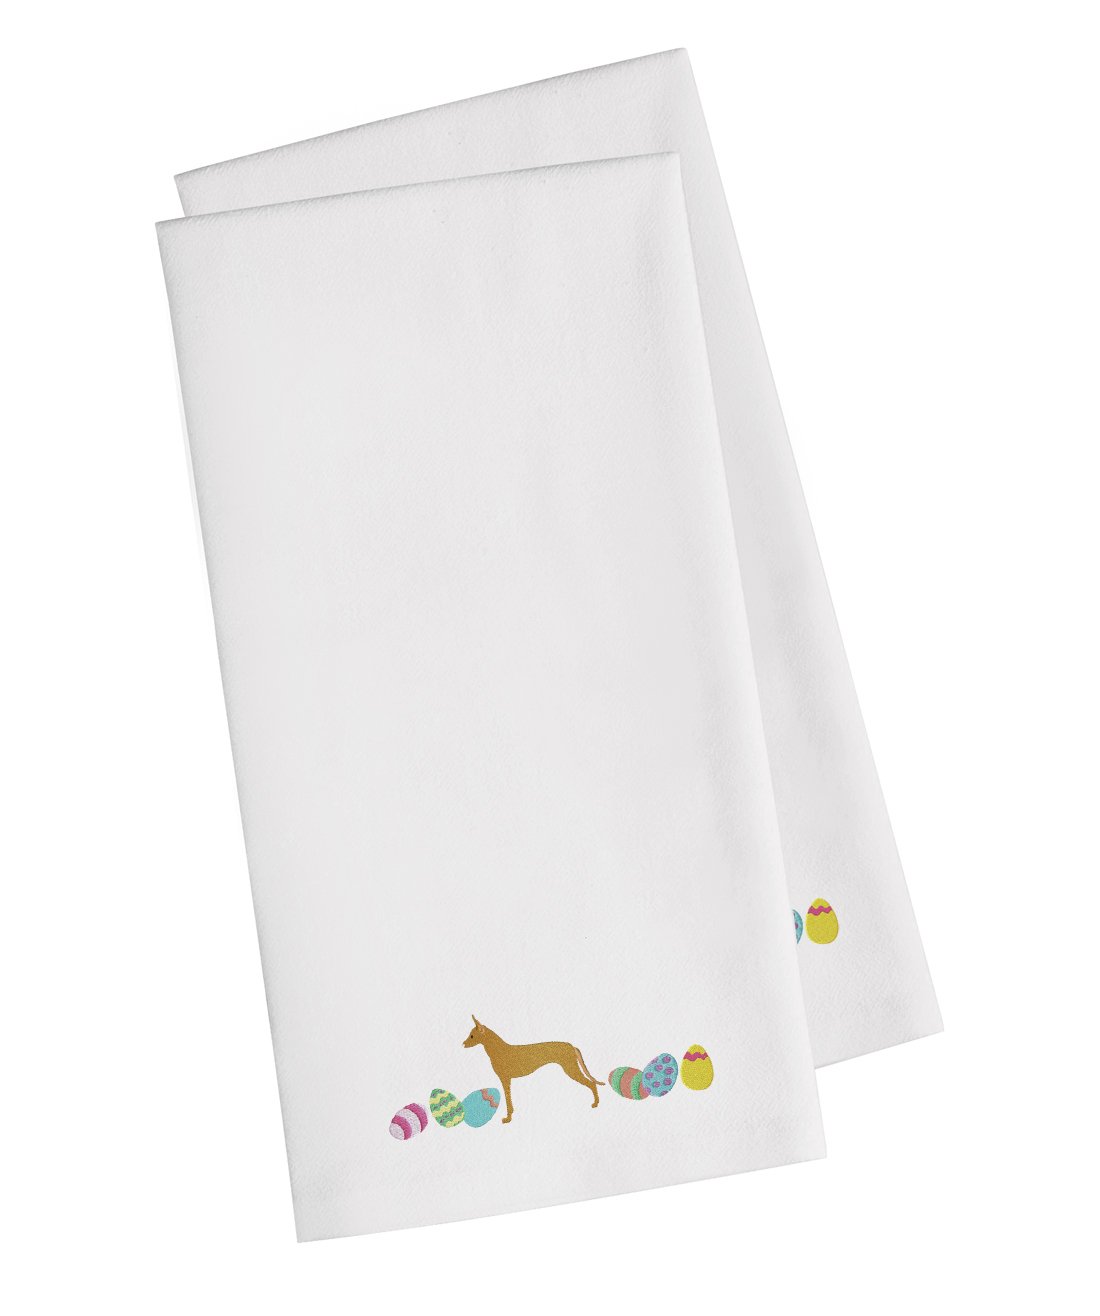 Pharaoh Hound Easter White Embroidered Kitchen Towel Set of 2 CK1668WHTWE by Caroline's Treasures